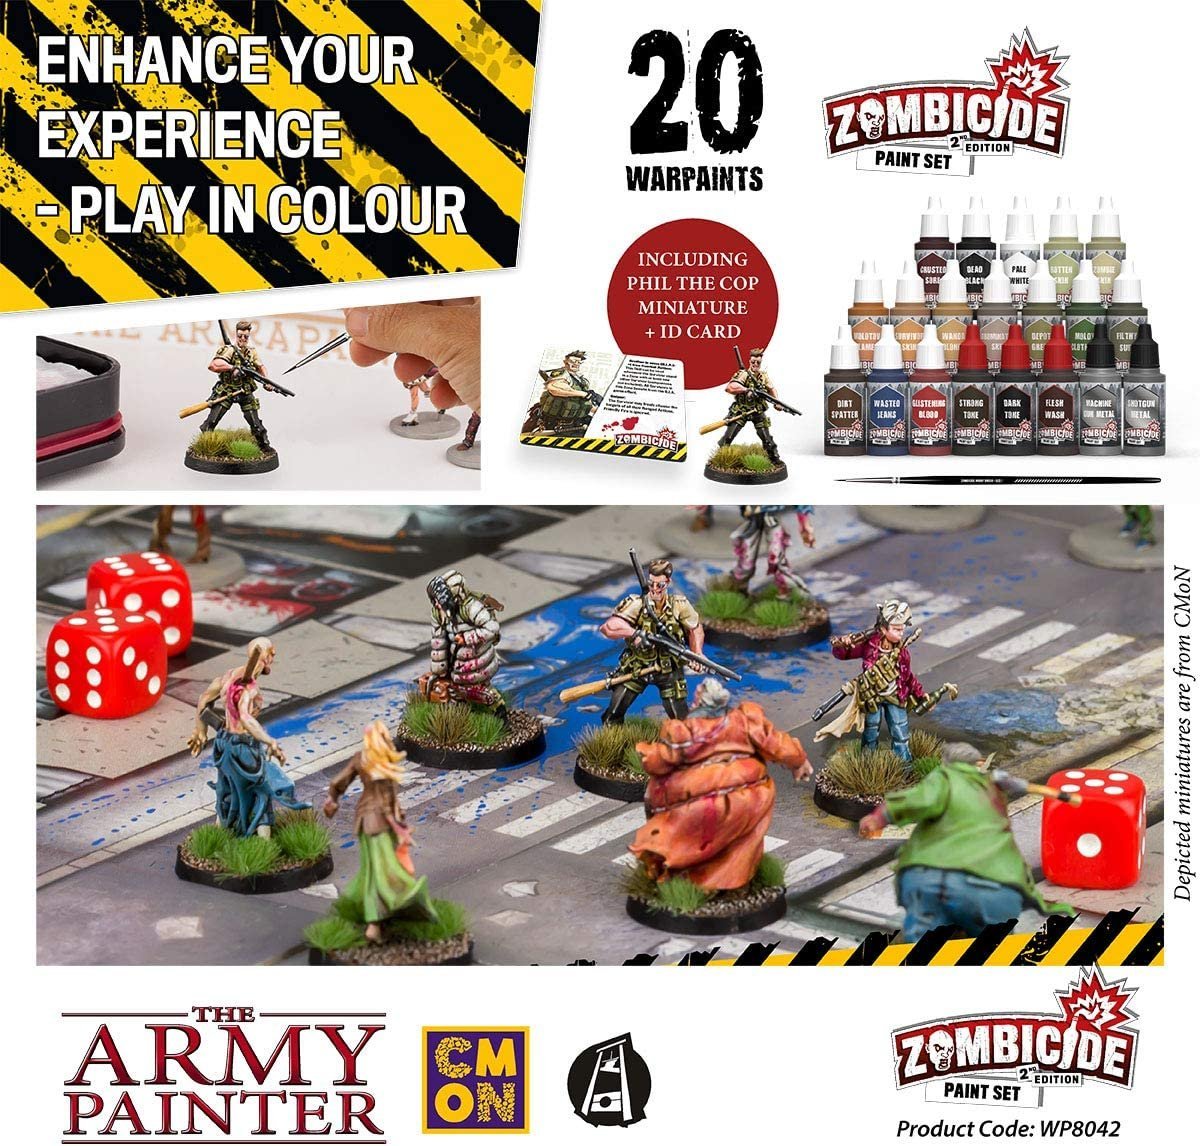 The Army Painter - Zombicide: 2nd ed. Paint Set